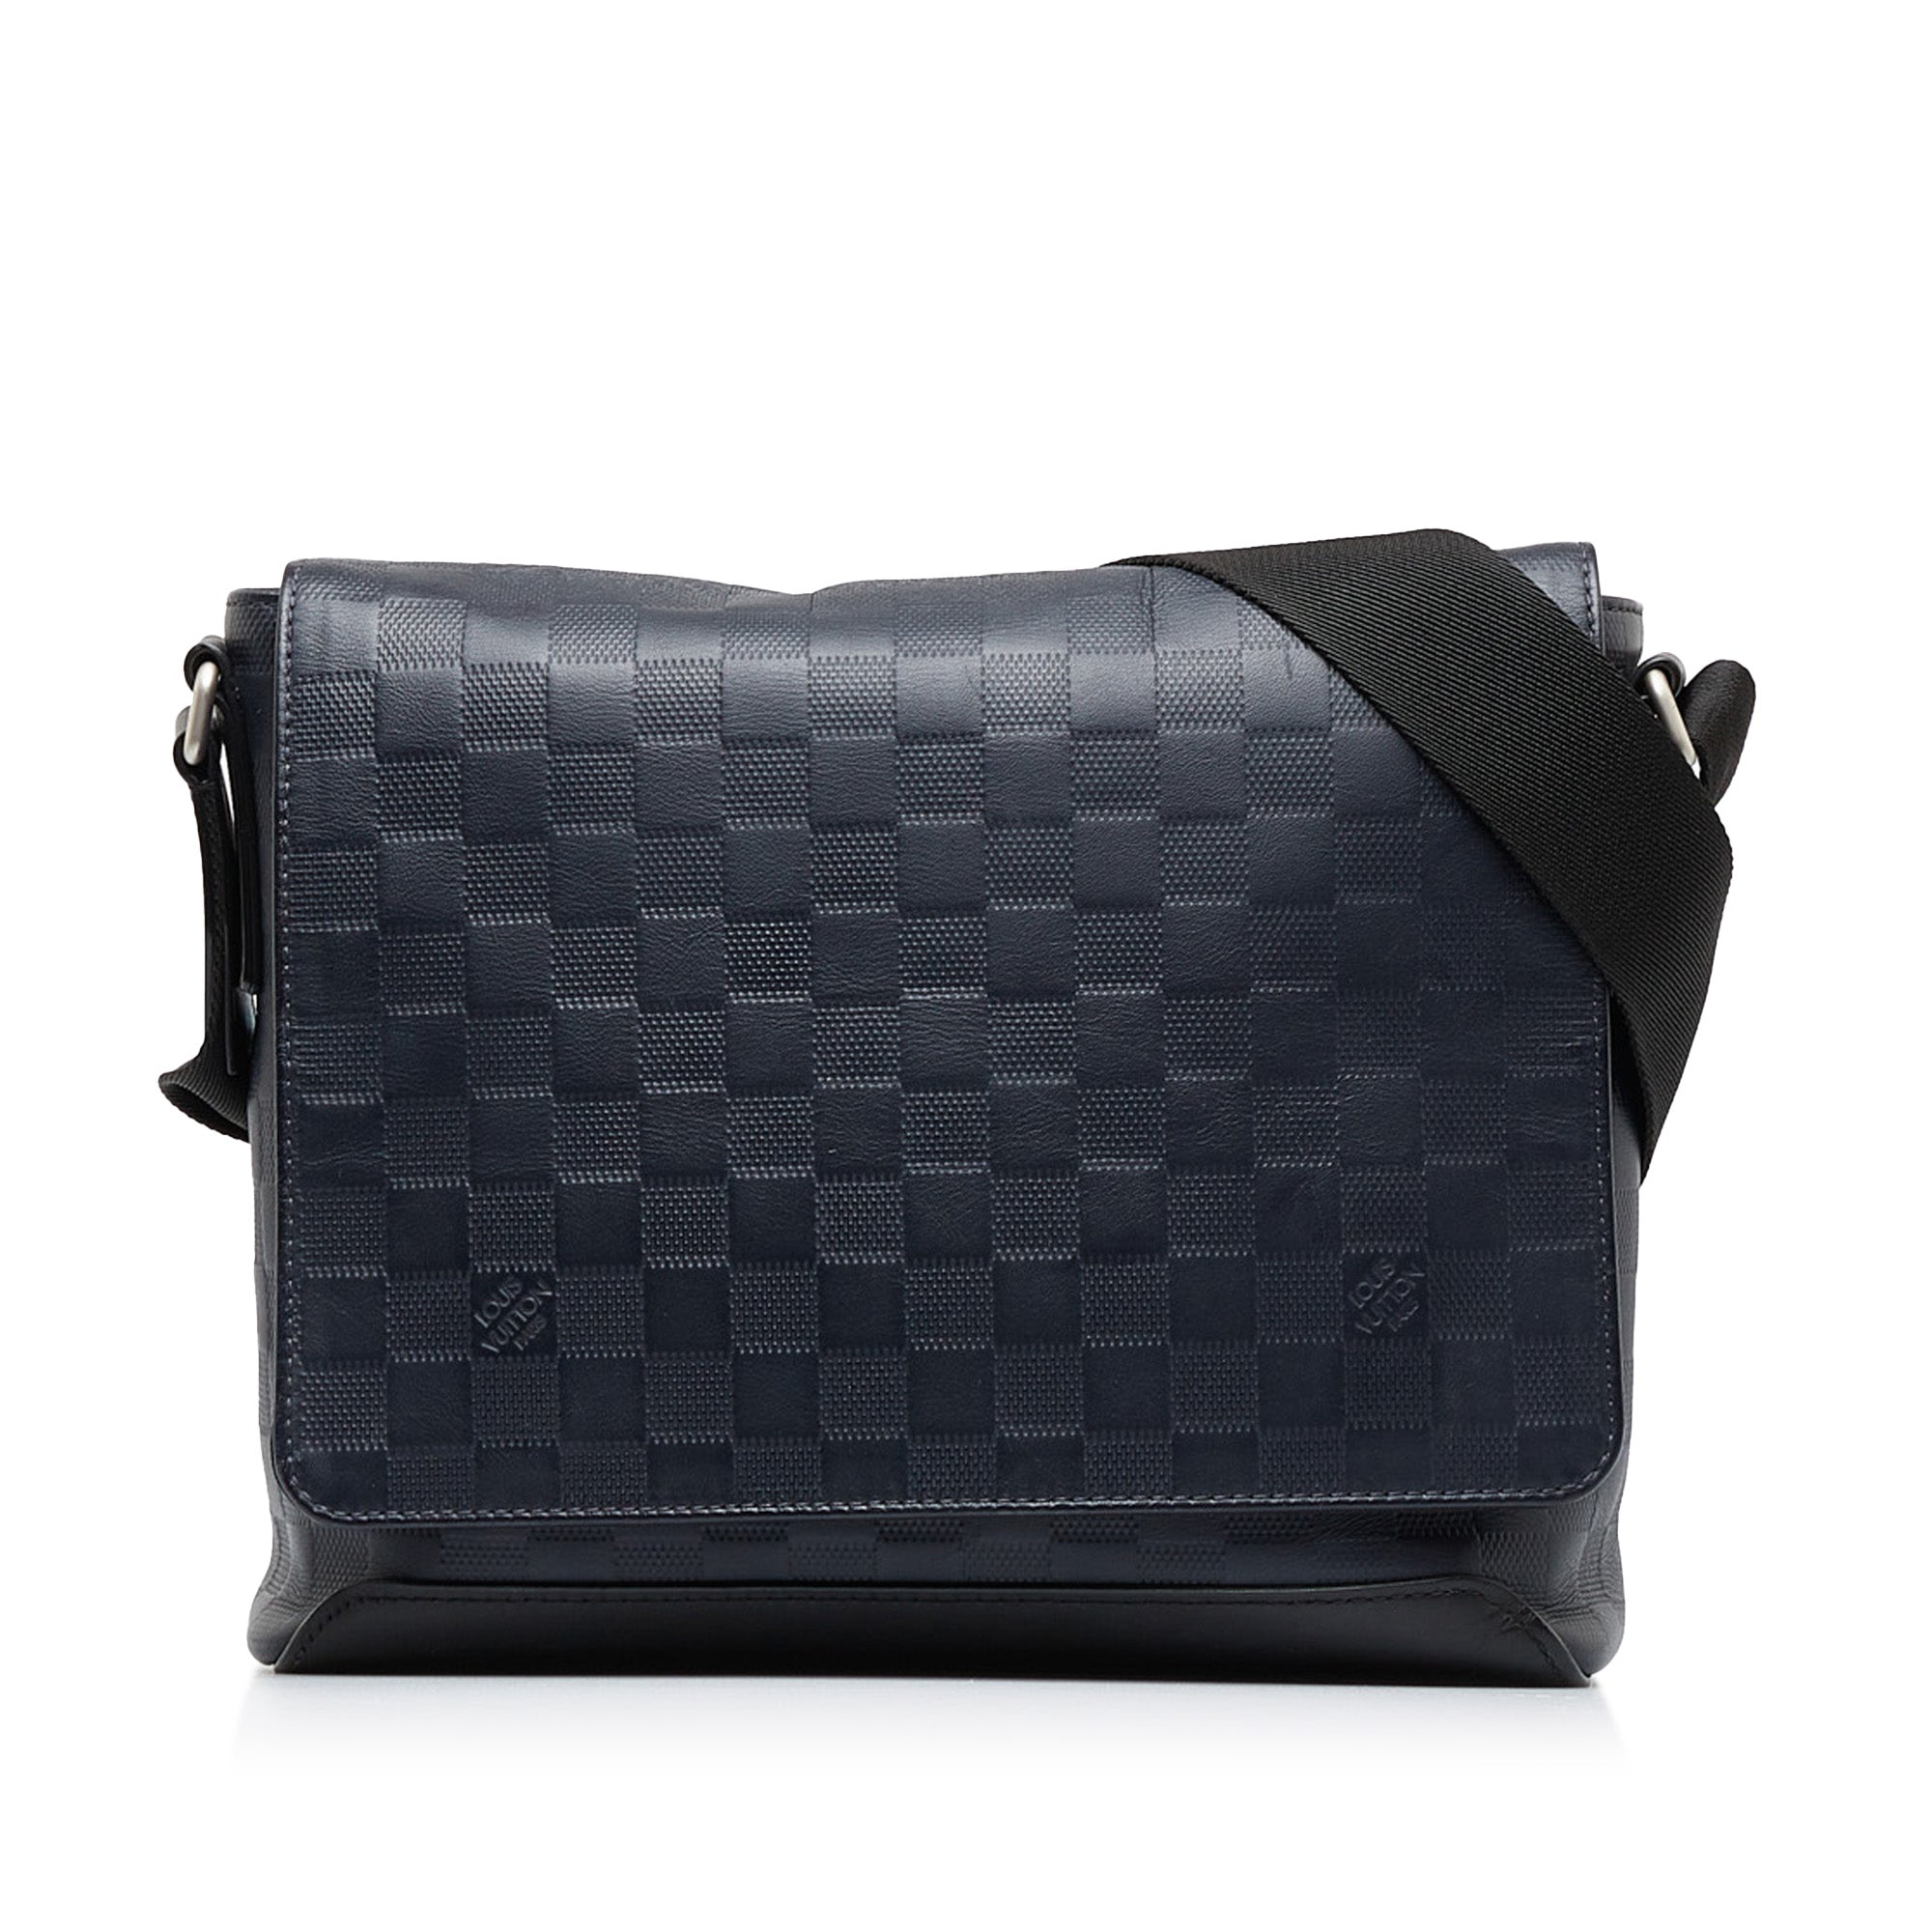 District PM Damier Infini Leather - Bags